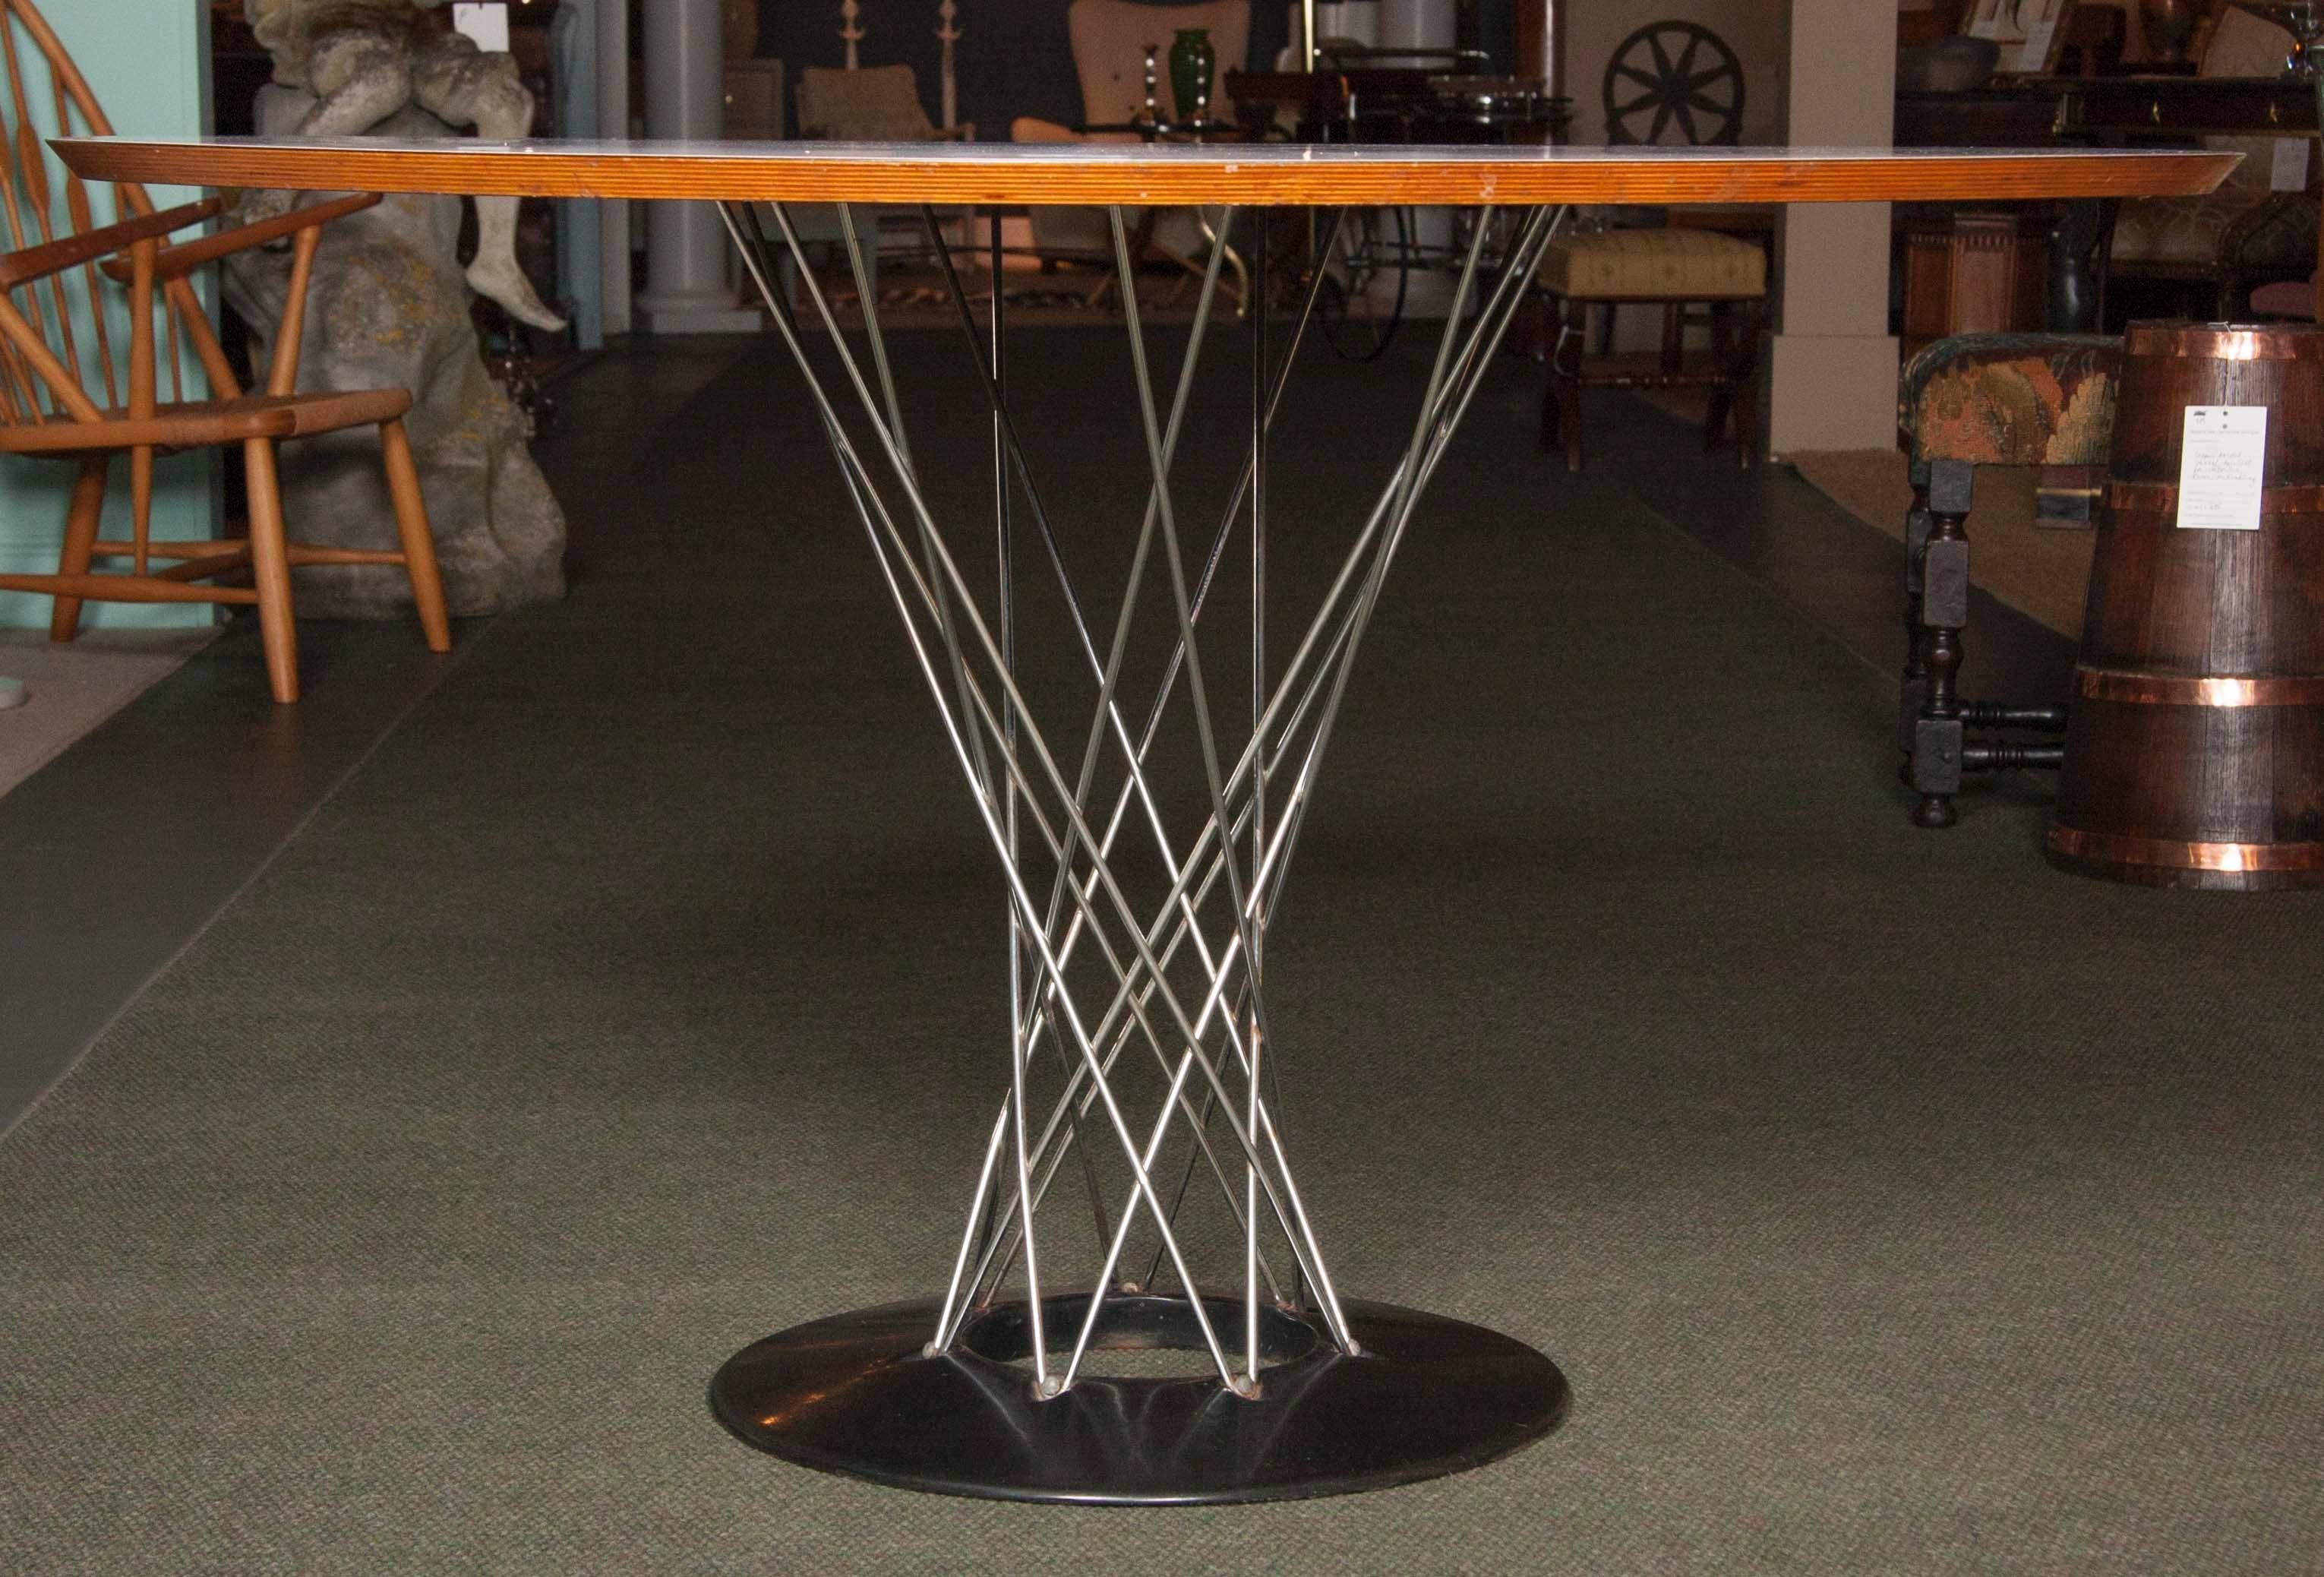 Offered for your consideration is an early “Cyclone” table by the famed Mid-Century designer Isamu Noguchi for Knoll. The table derives its name from the twisted wire base that curves out from the porcelain coated cast iron base. The top is made of